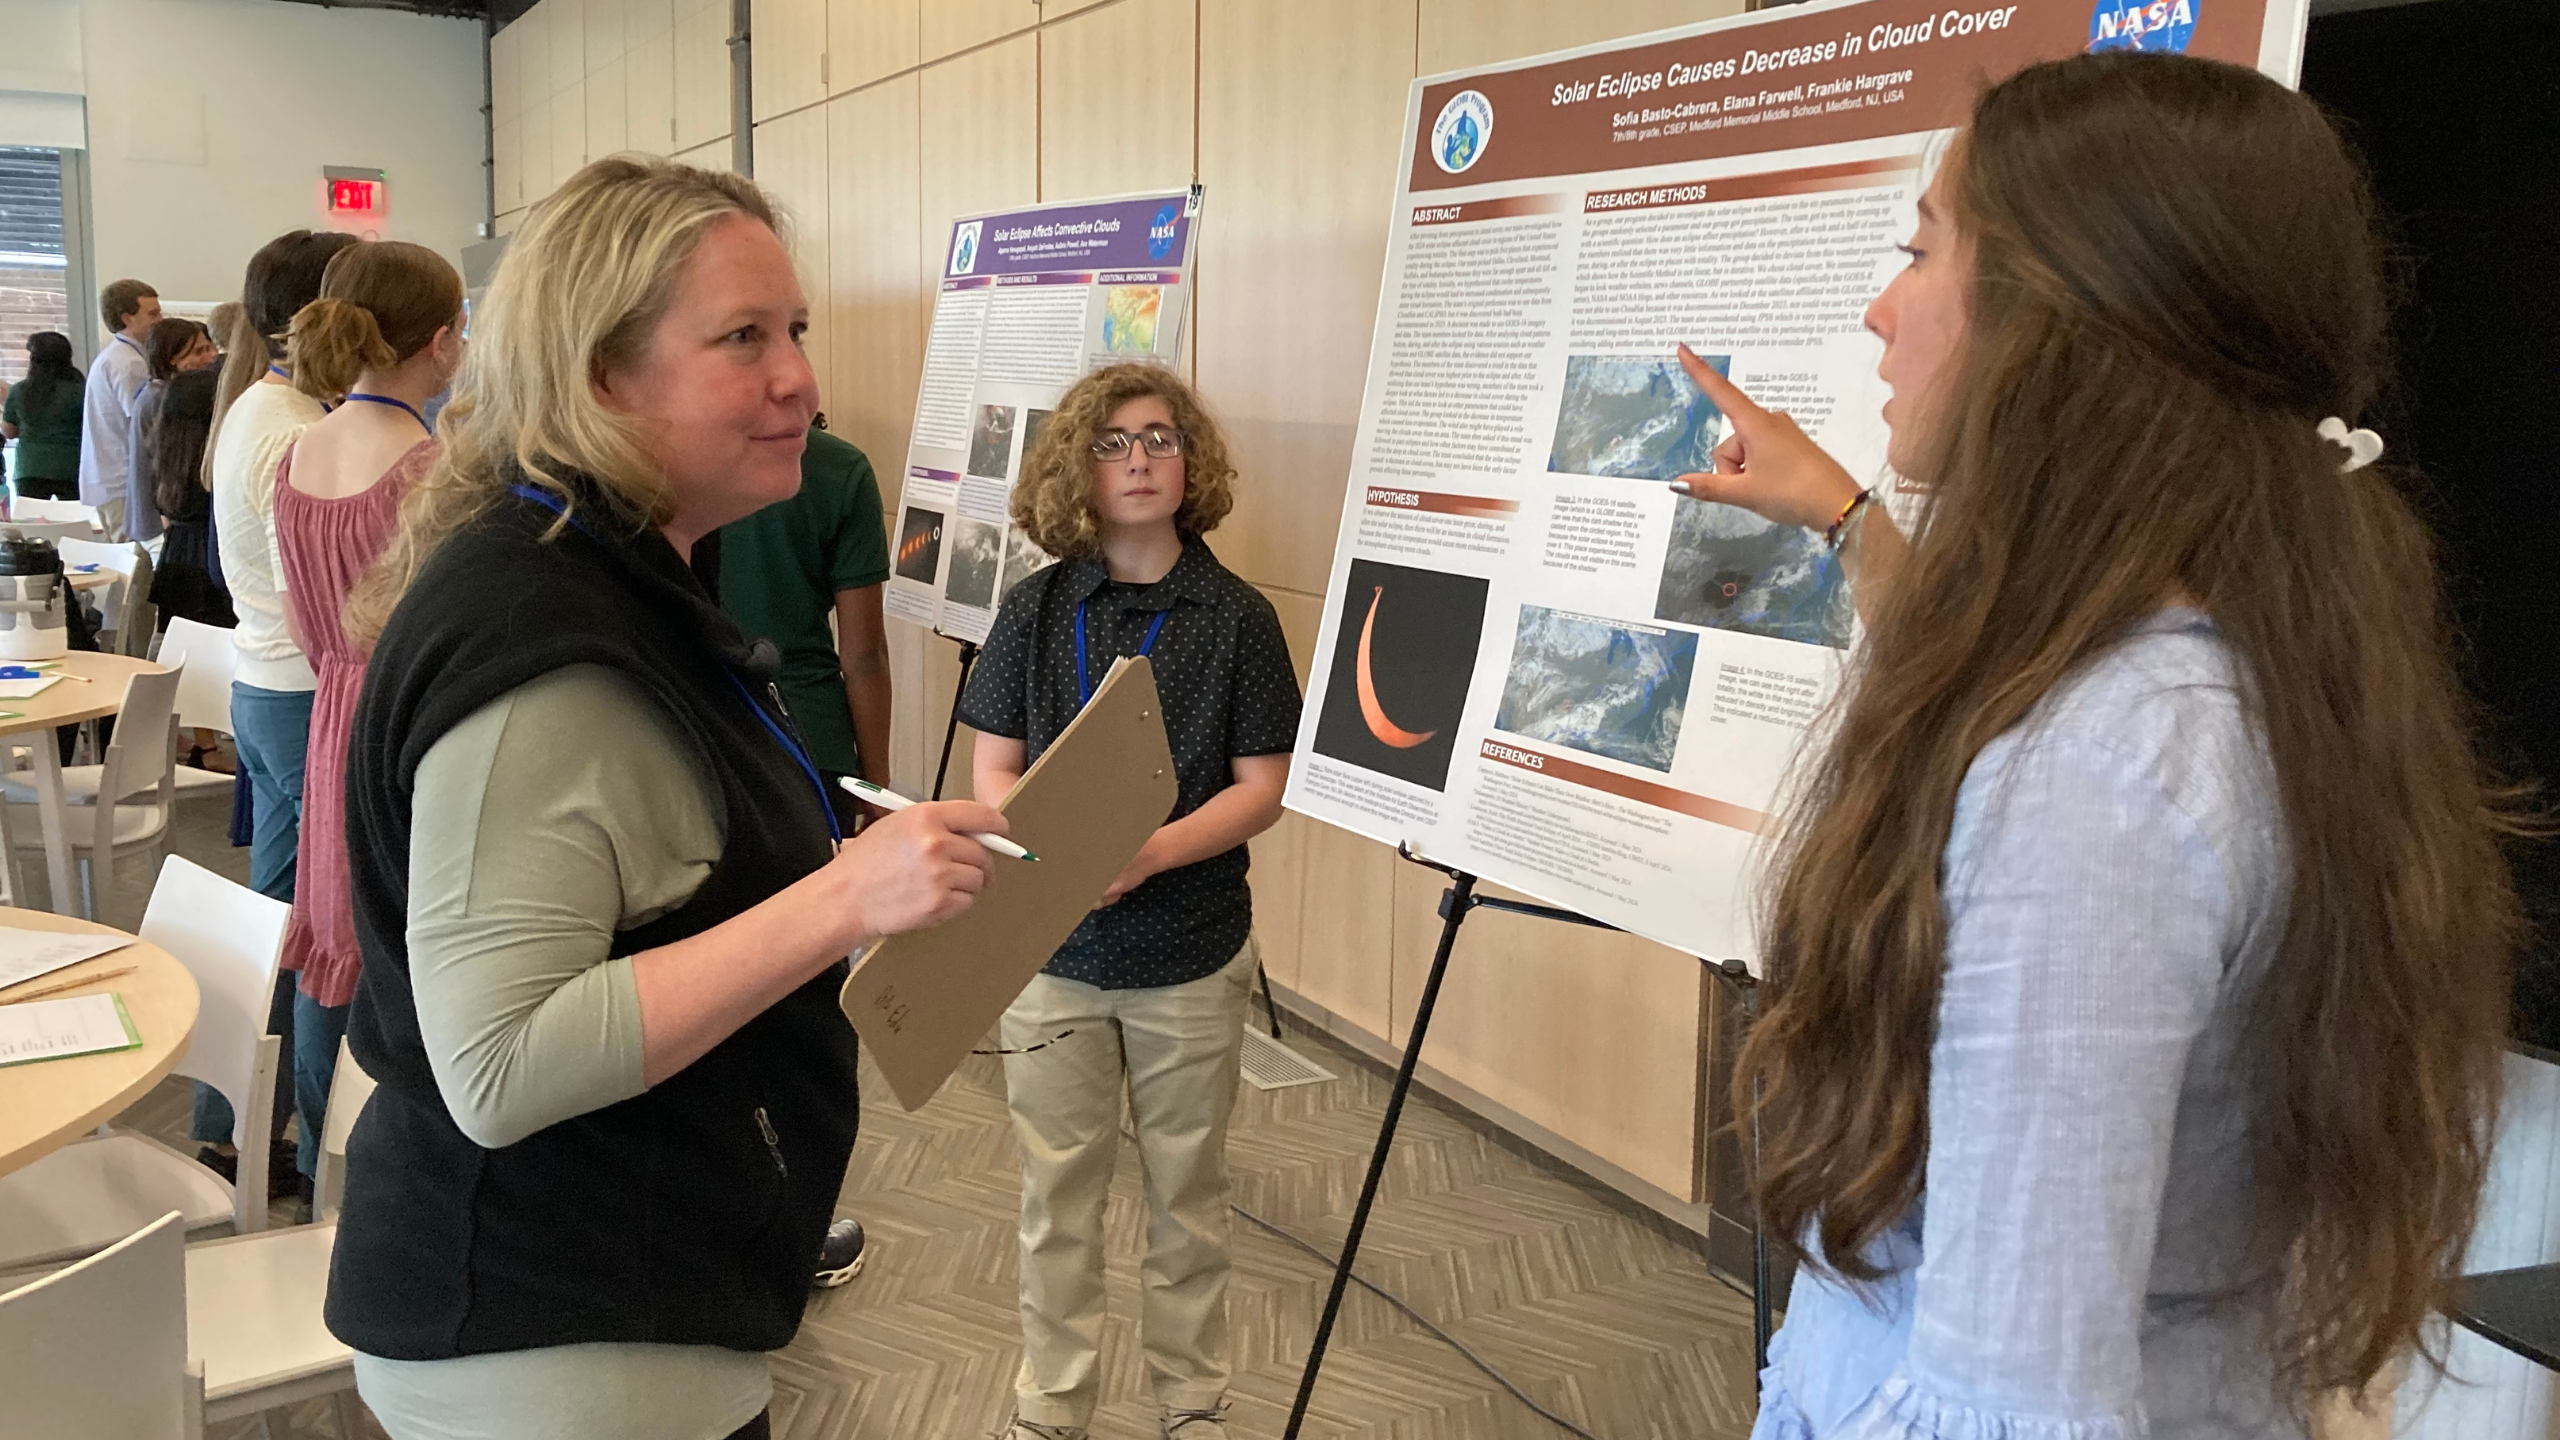 students present their research poster "Solar Eclipse Causes Decrease in Cloud Cover" to a STEM professional at the student research symposium